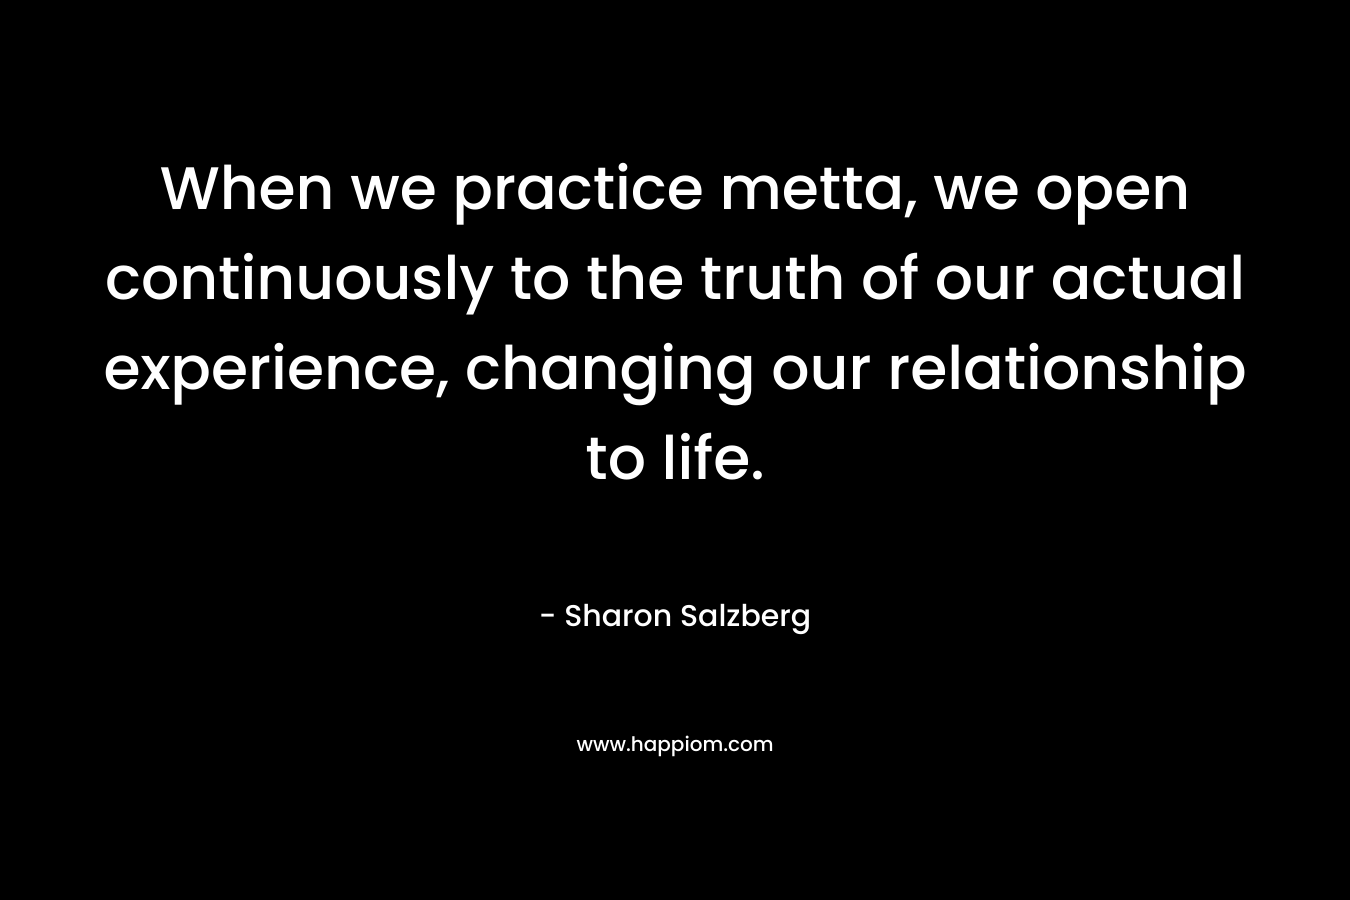 When we practice metta, we open continuously to the truth of our actual experience, changing our relationship to life.